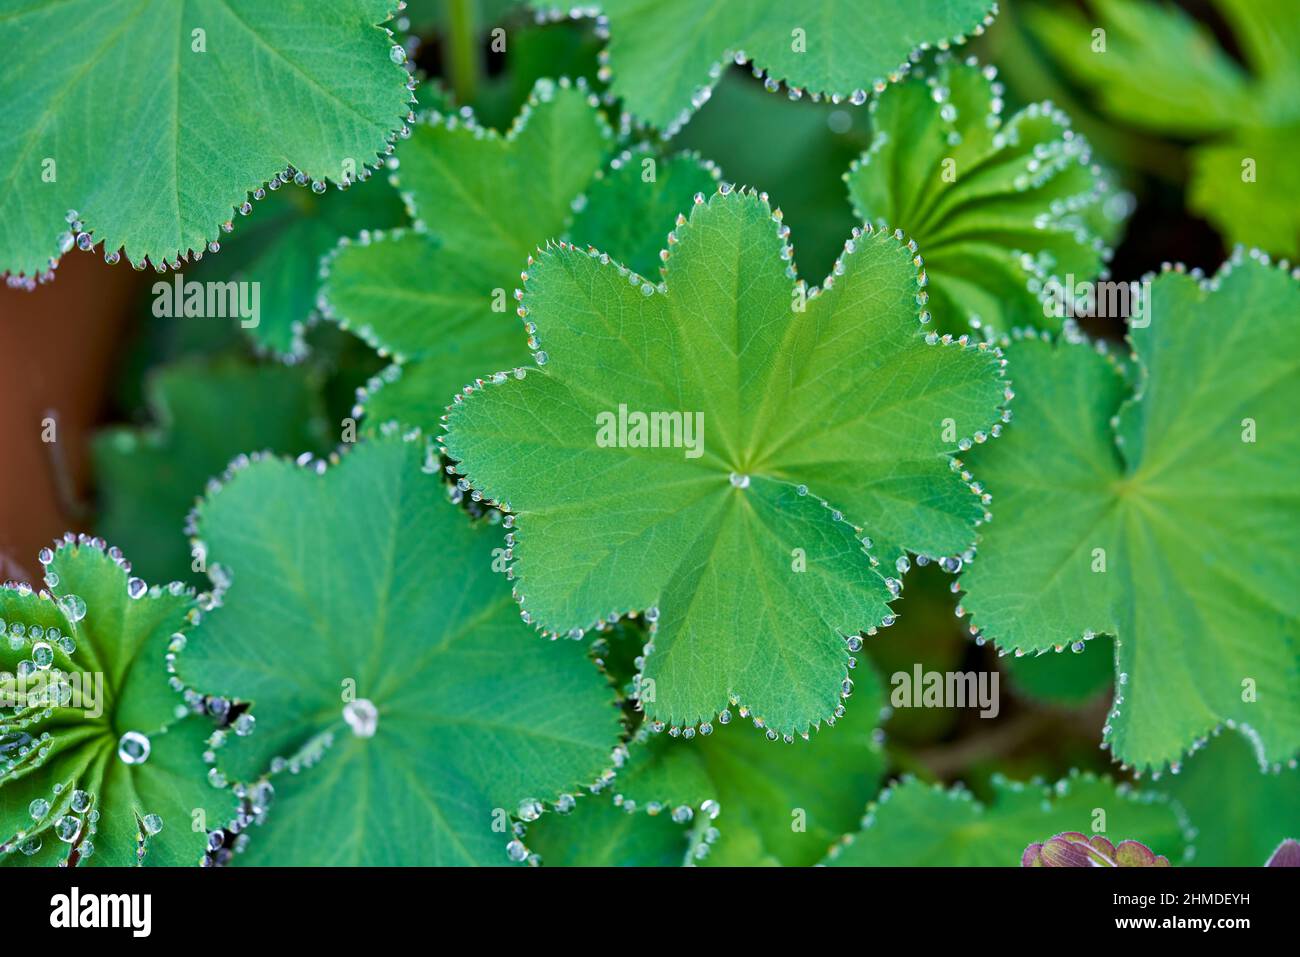 Pretty leaves of alchemilla mollis plant with water droplets on the leaf edges. Perennial cottage garden plant with rain drops. Stock Photo